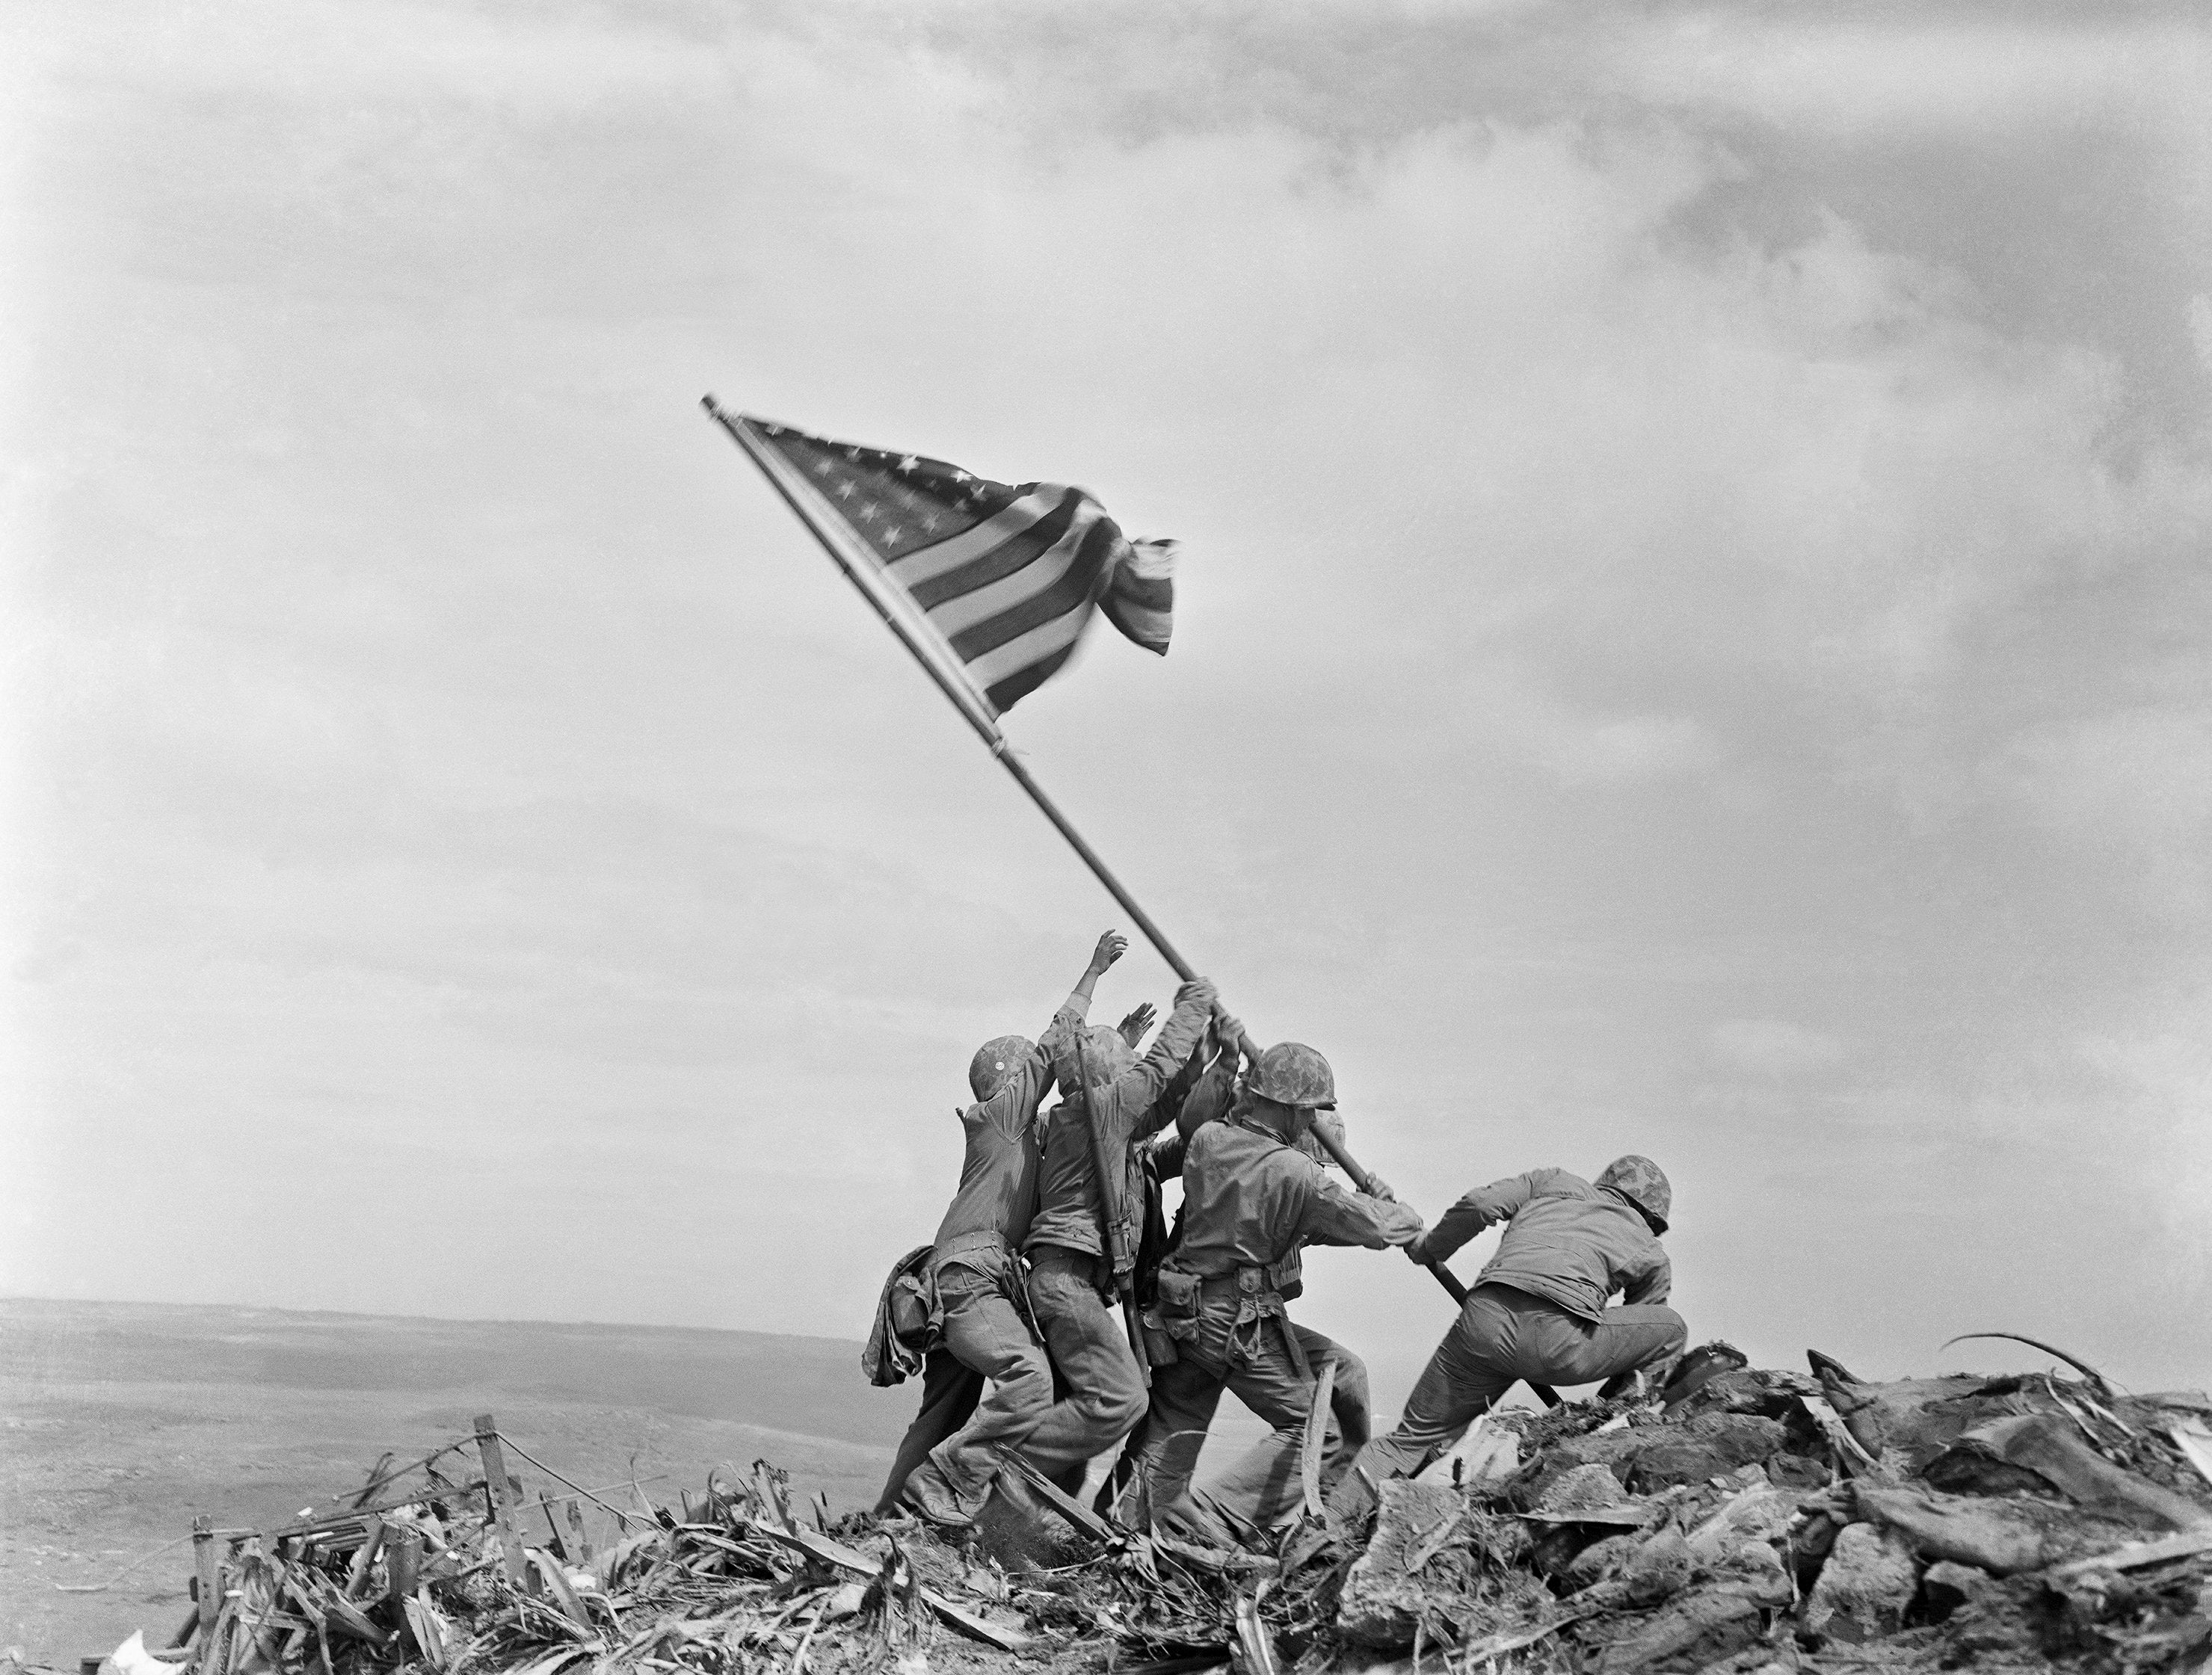 By Joe Rosenthal - https://www.apnews.com/f00e1181d57a414a848ac96b772839fddirect linkThis file was derived from: Raising the Flag on Iwo Jima, larger.jpeg, Public Domain, https://commons.wikimedia.org/w/index.php?curid=77823832